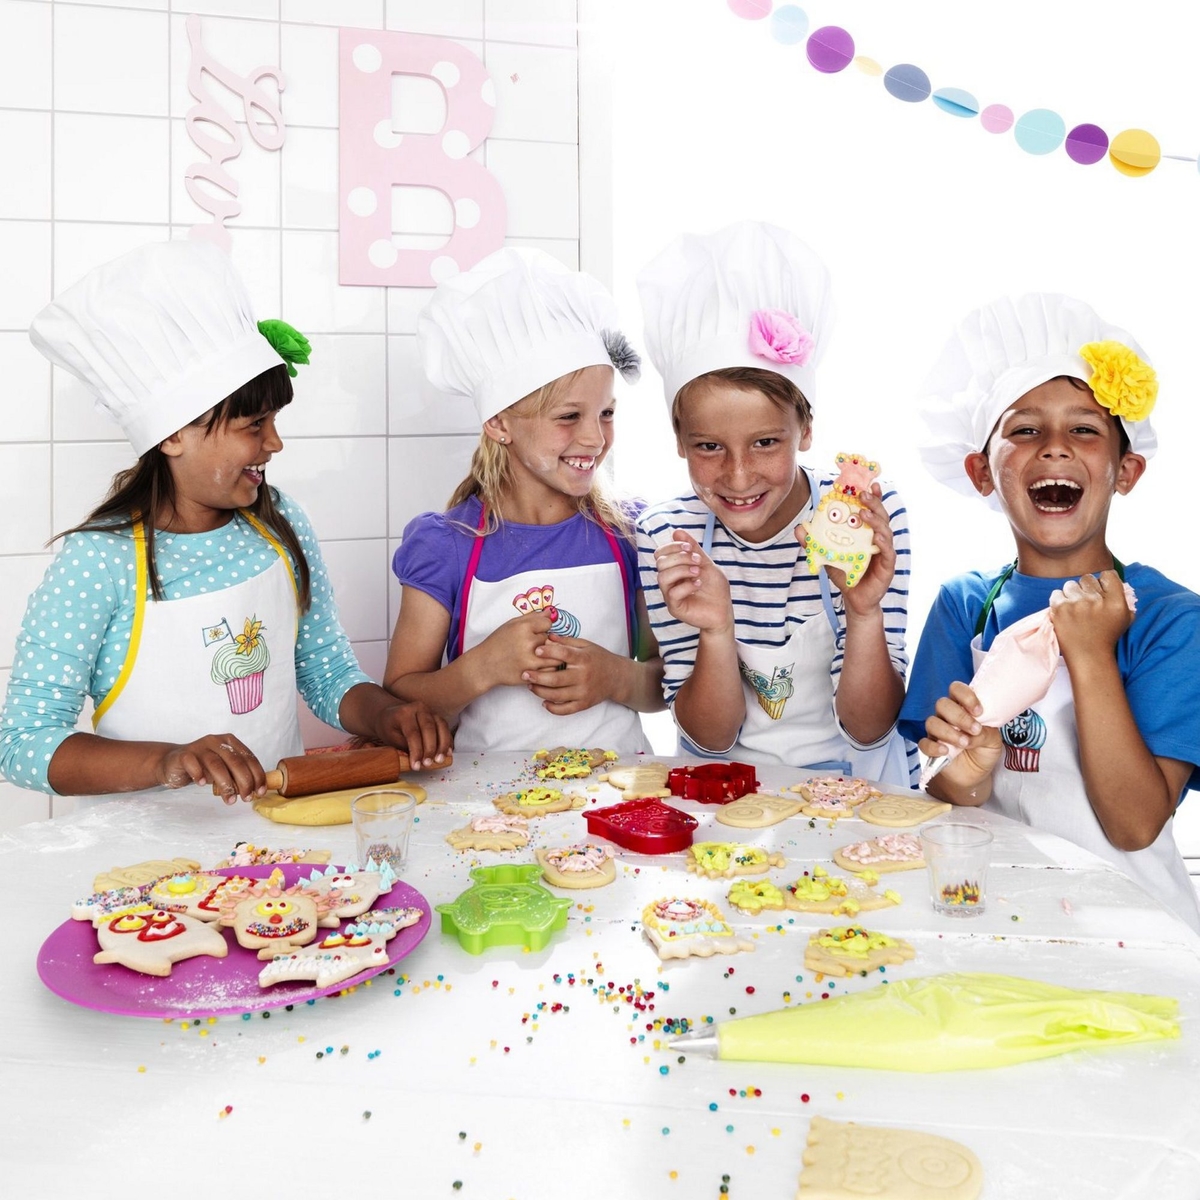 A kid's party; no - a baking party!